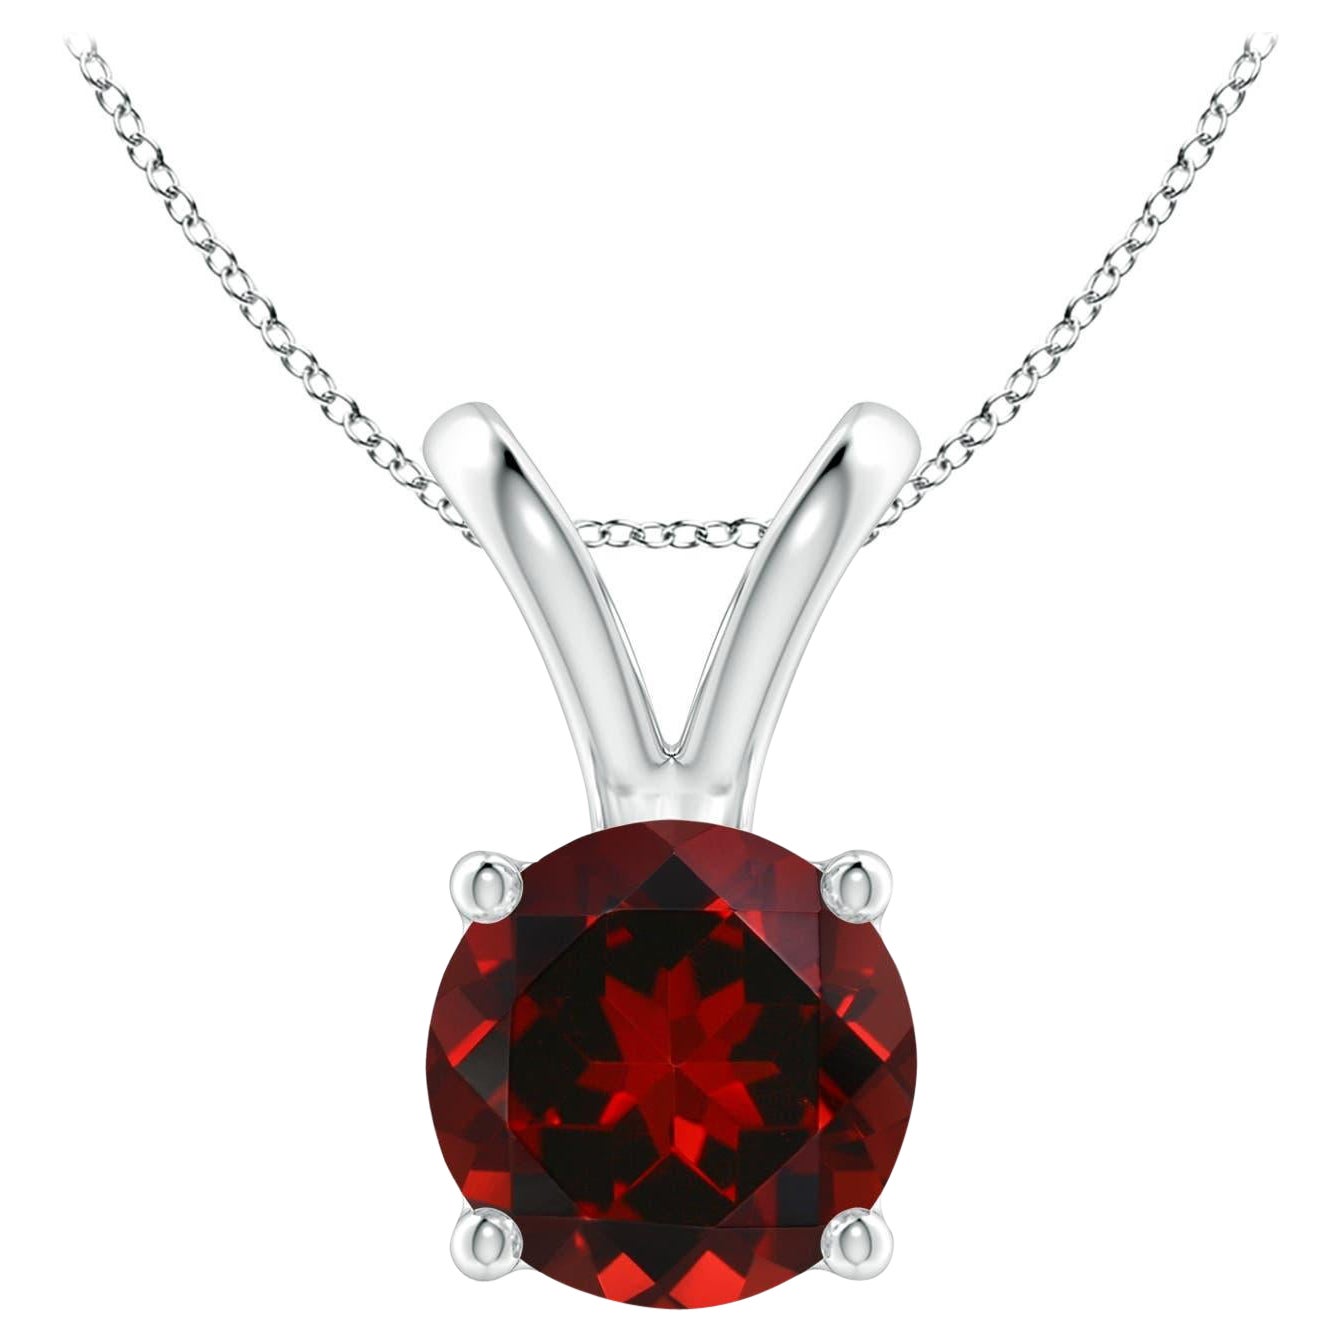 Natural V-Bale Round 2.2ct Garnet Solitaire Pendant in 14K White Gold